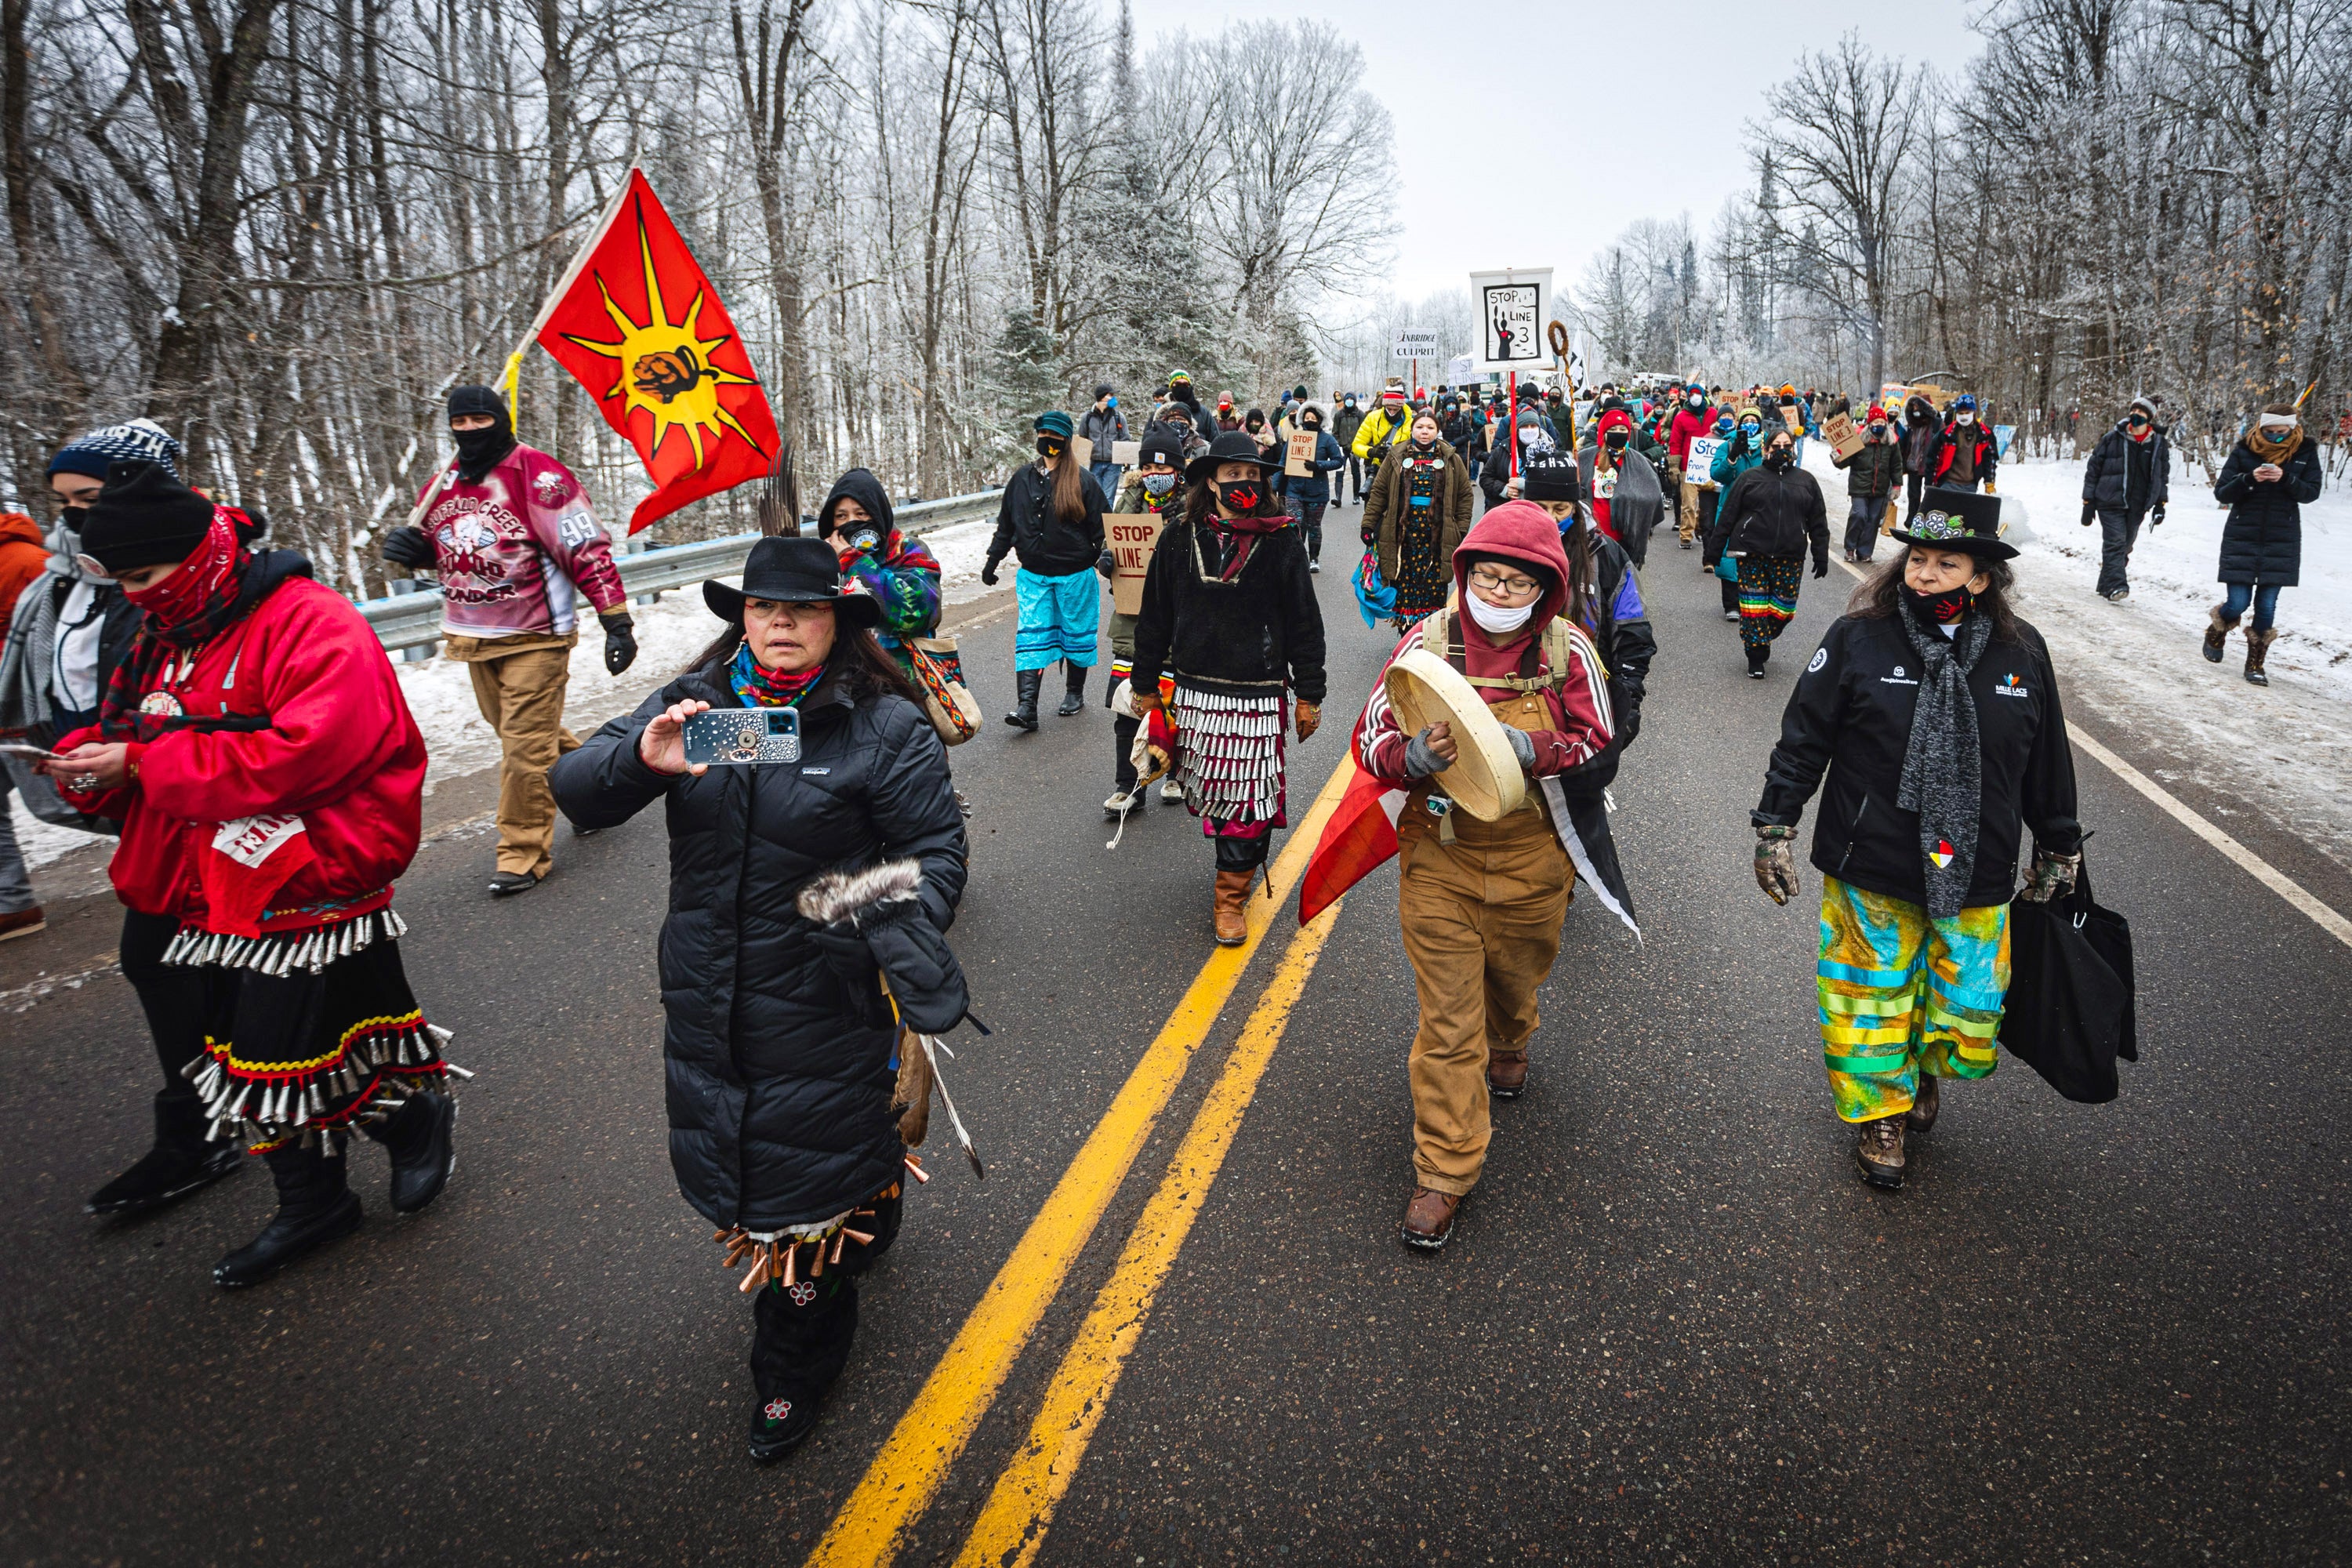 Native women lead hundreds of marchers to a spot near where the Line 3 pipeline will cross under the Mississippi River during a protest on Jan. 9, 2021.